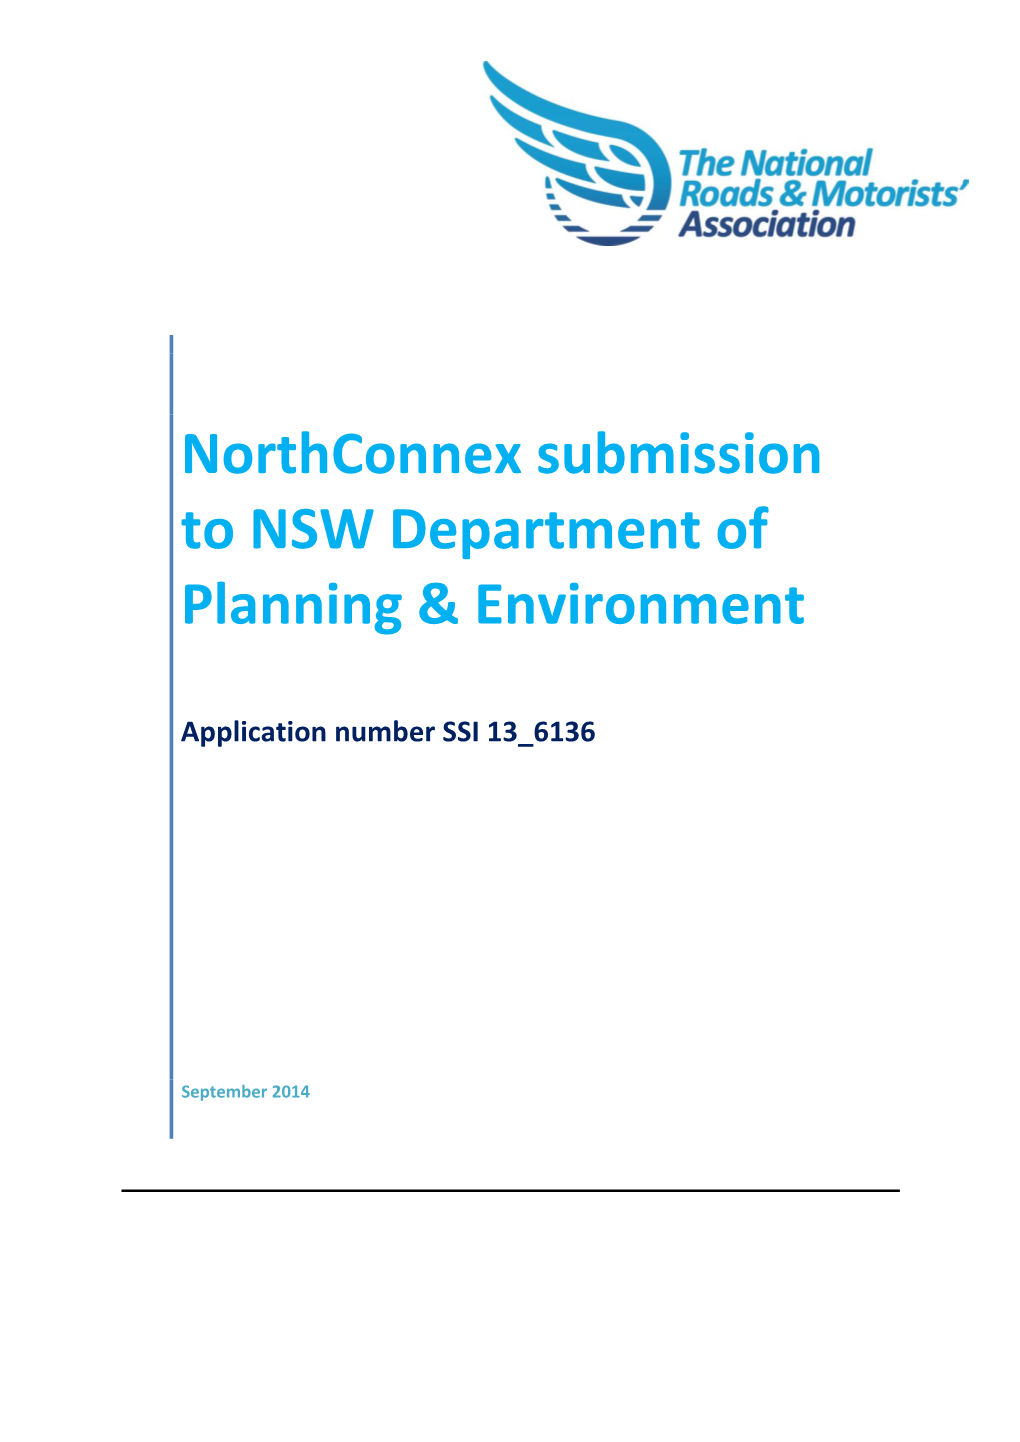 Northconnex Submission to NSW Department of Planning & Environment